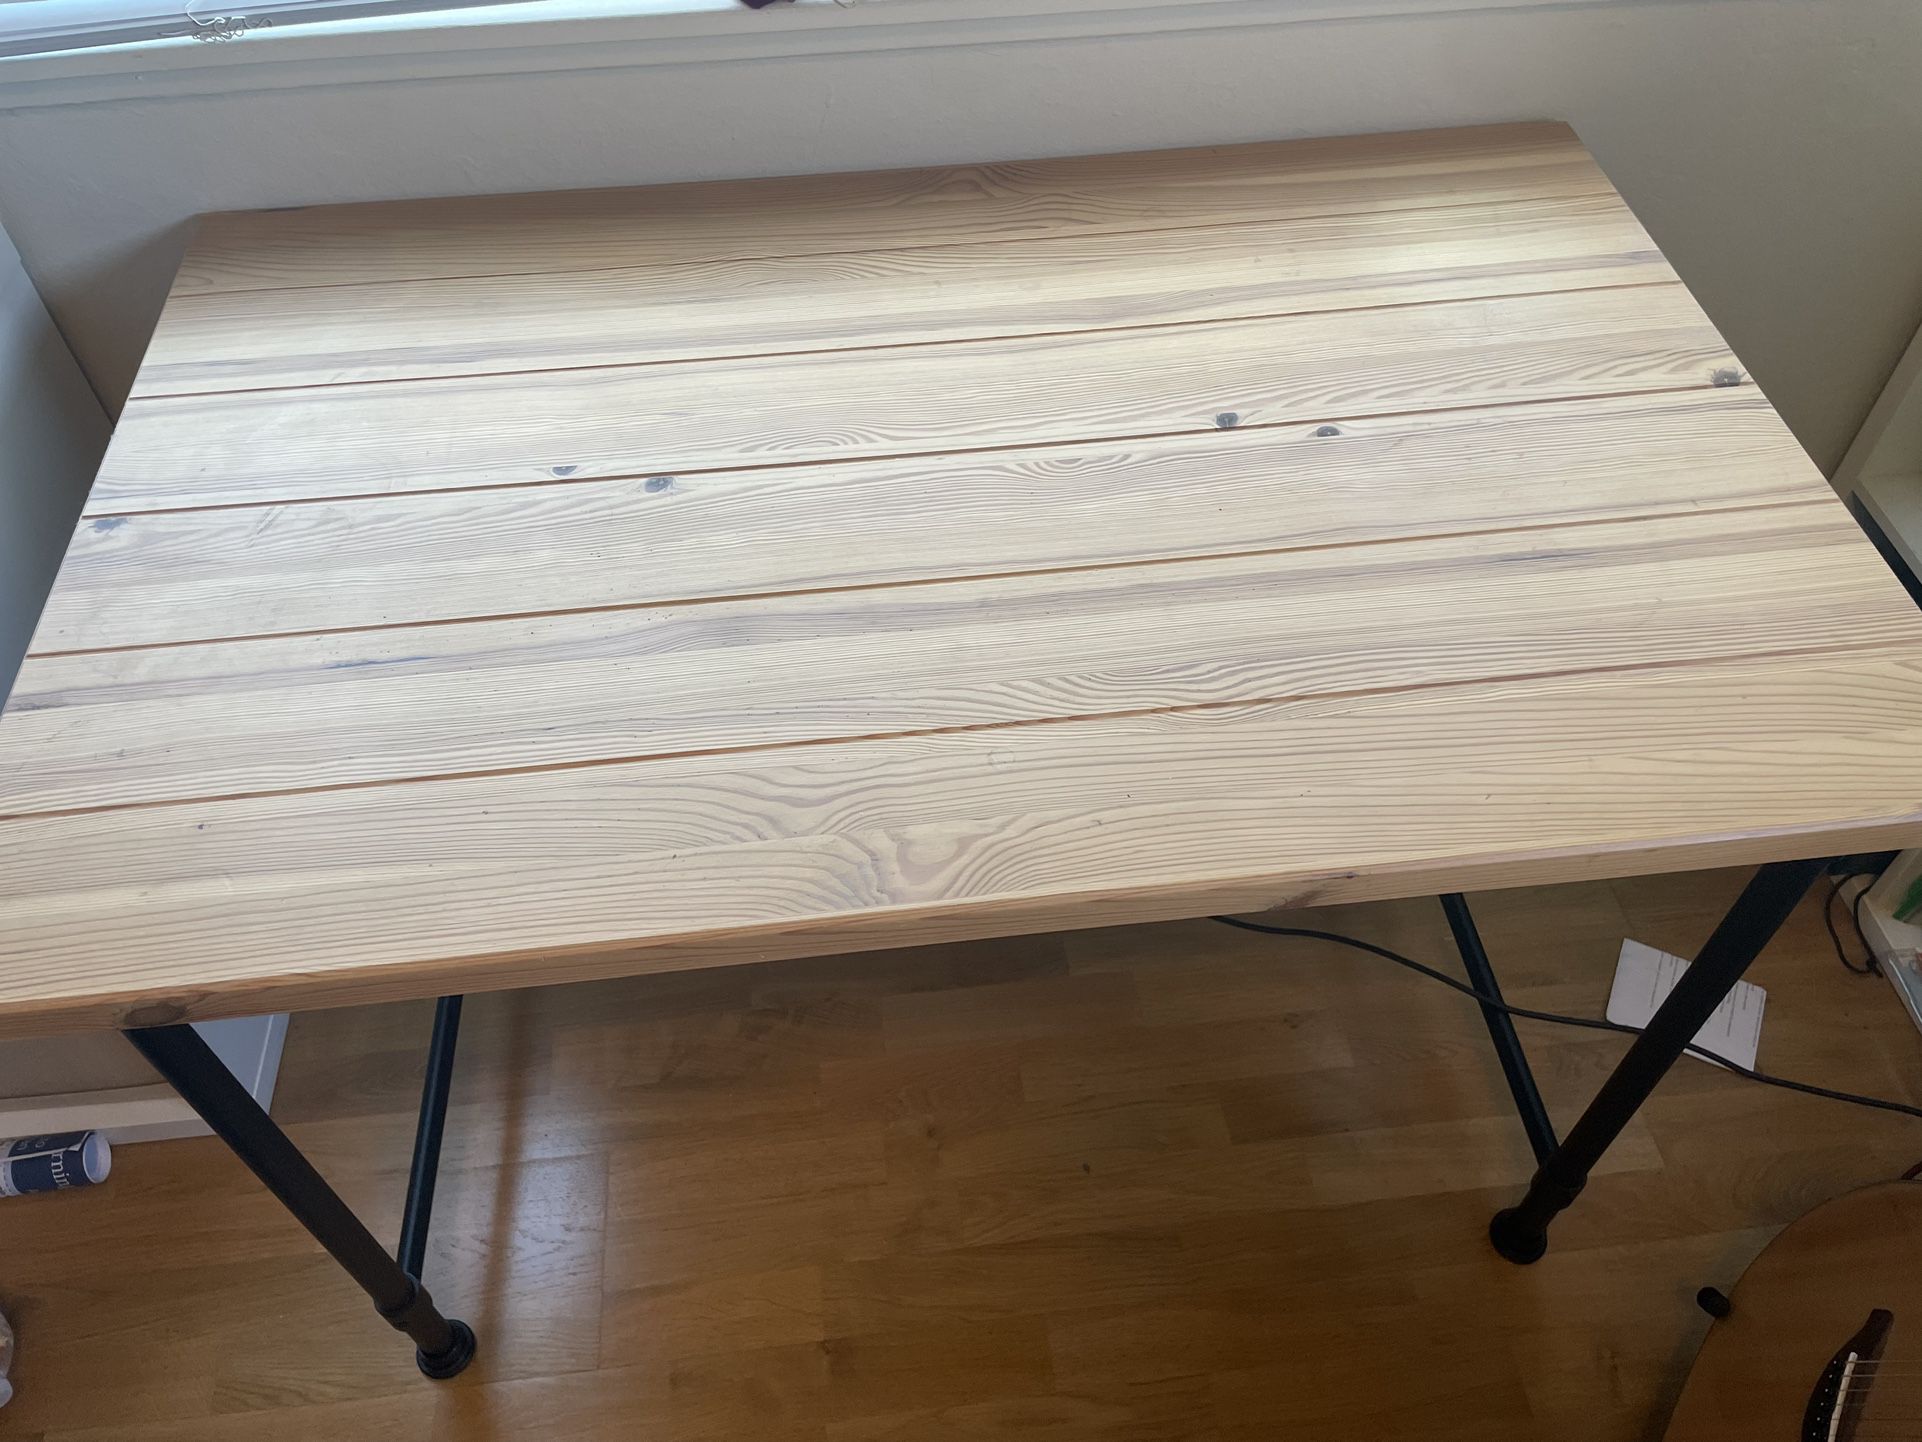 Wooden Desk with Black Industrial Legs - Used